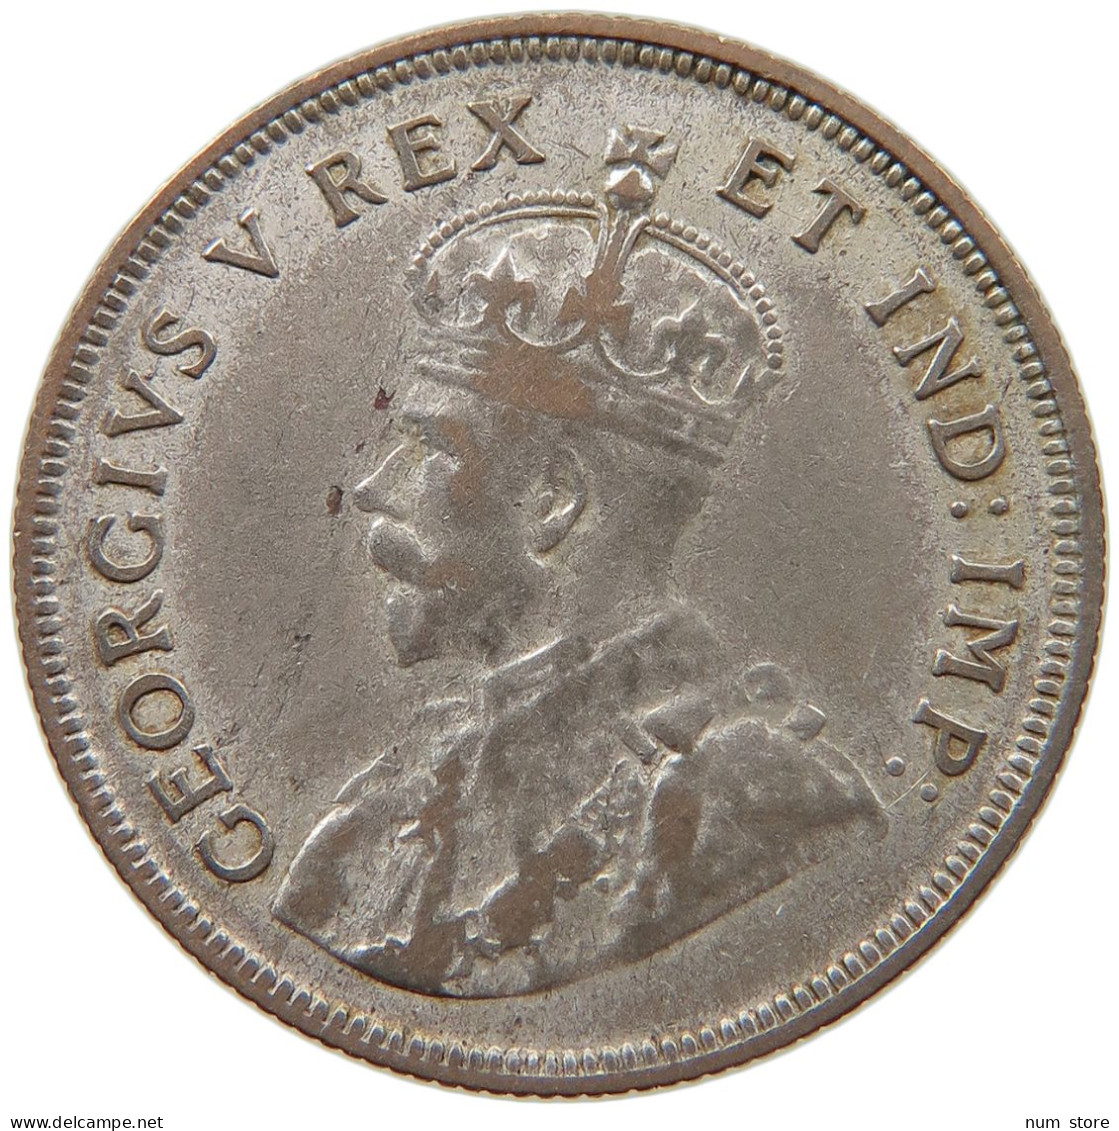 EAST AFRICA SHILLING 1924 GEORGE V. (1910-1936) #MA 065502 - British Colony